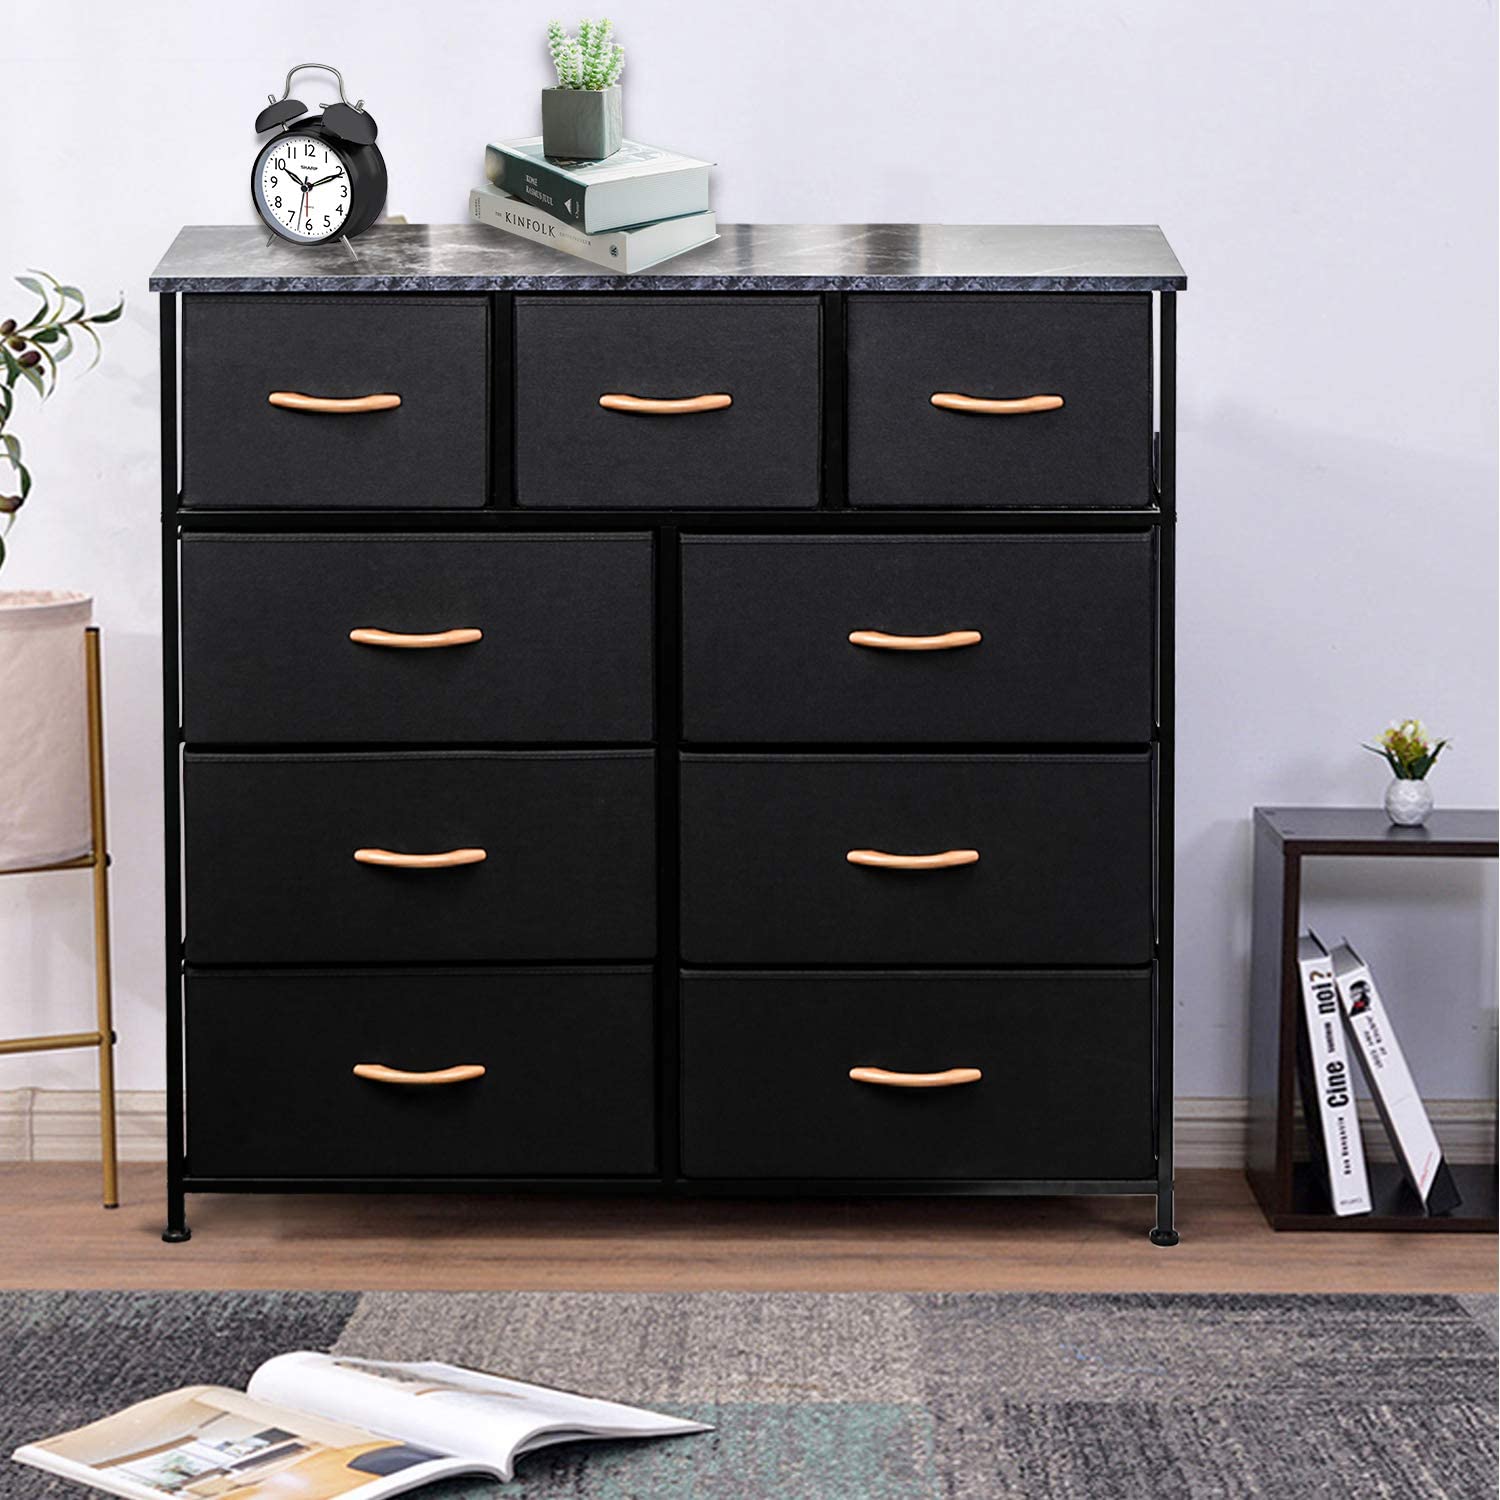 CERBIOR Wide Drawer Dresser Storage Organizer 9-Drawer Closet Shelves, Sturdy Steel Frame Marbling Wood Top with Easy Pull Fabric Bins for Clothing, Blankets (9-Black Drawers)